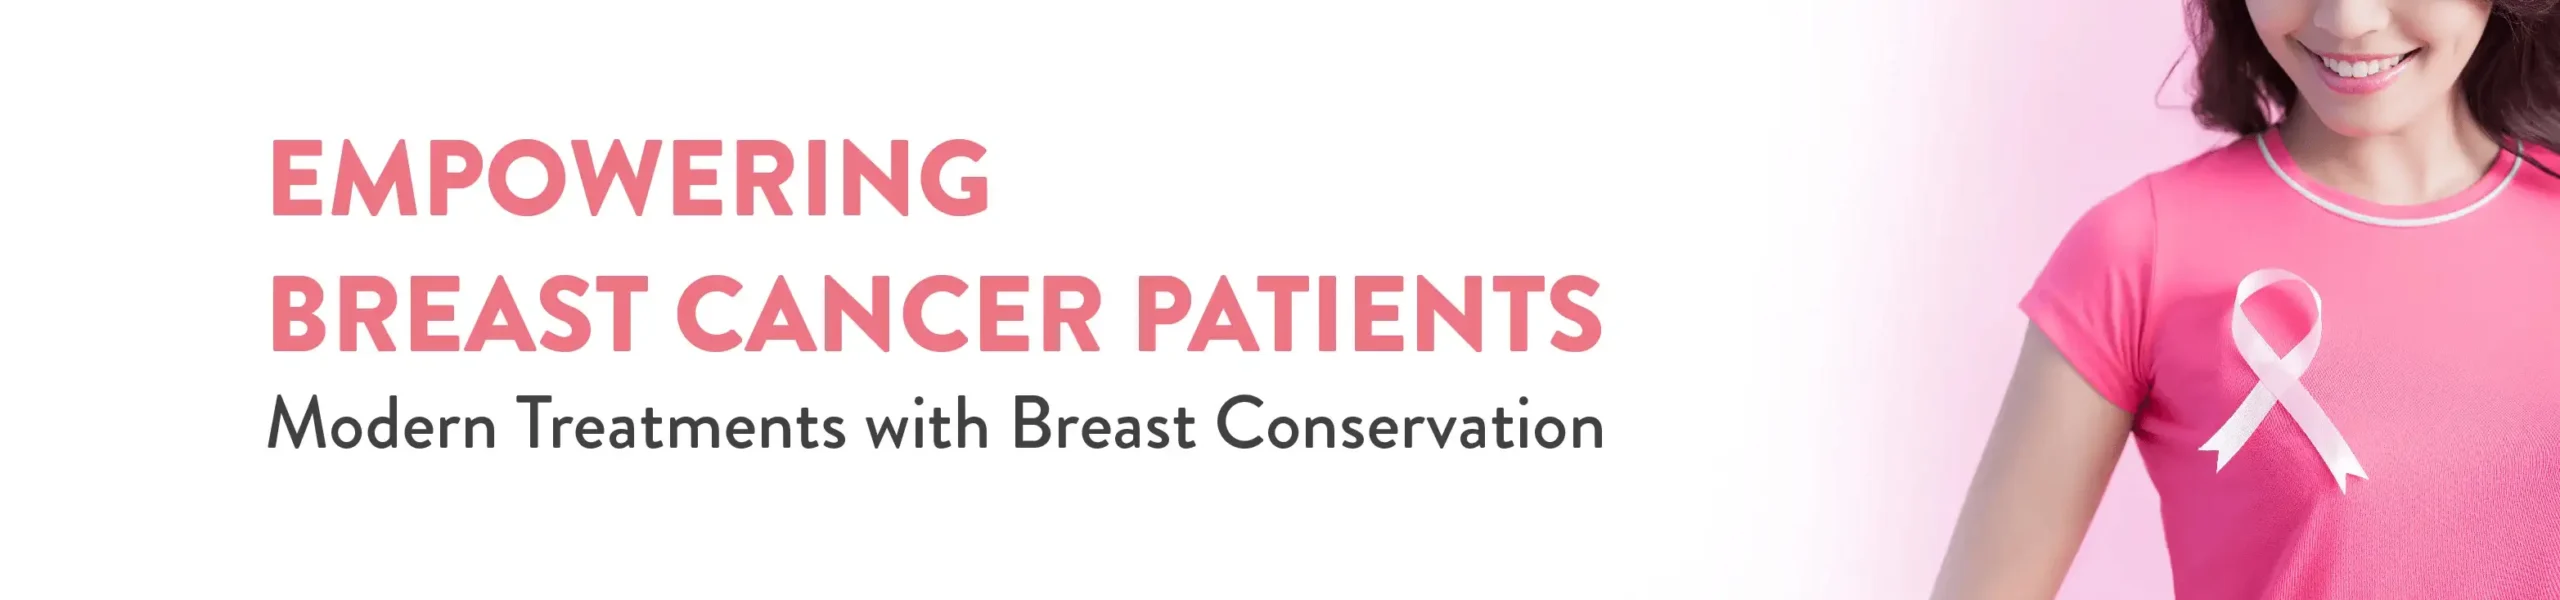 Empowering Breast Cancer Patients